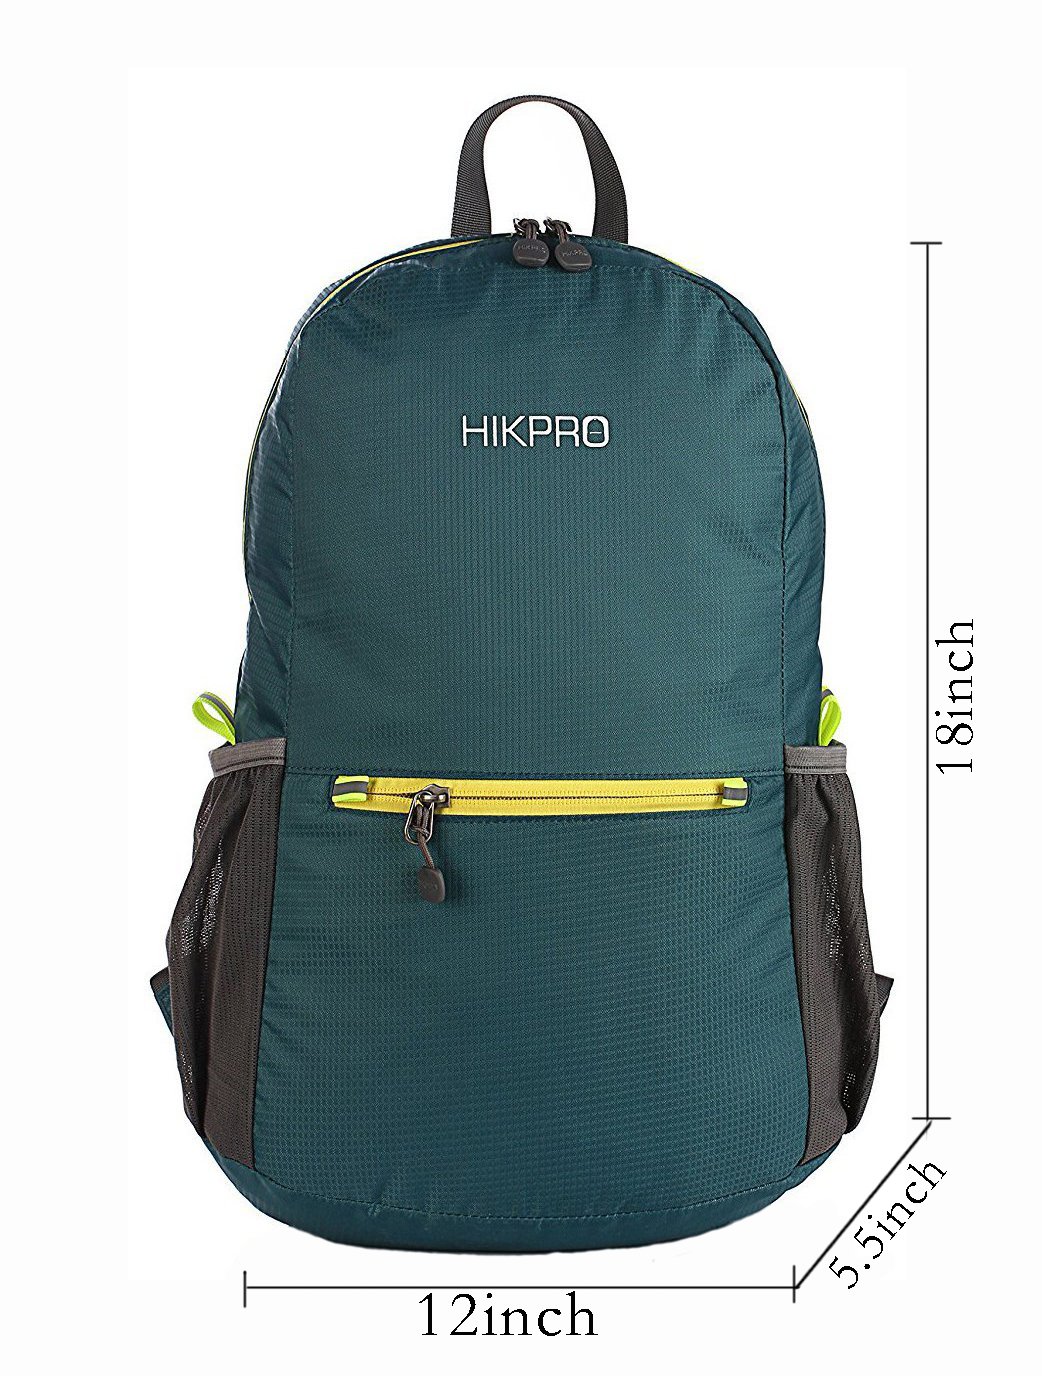 HIKPRO 20L - The Most Durable Lightweight Packable Backpack, Water Resistant Travel Hiking Daypack for Men & Women